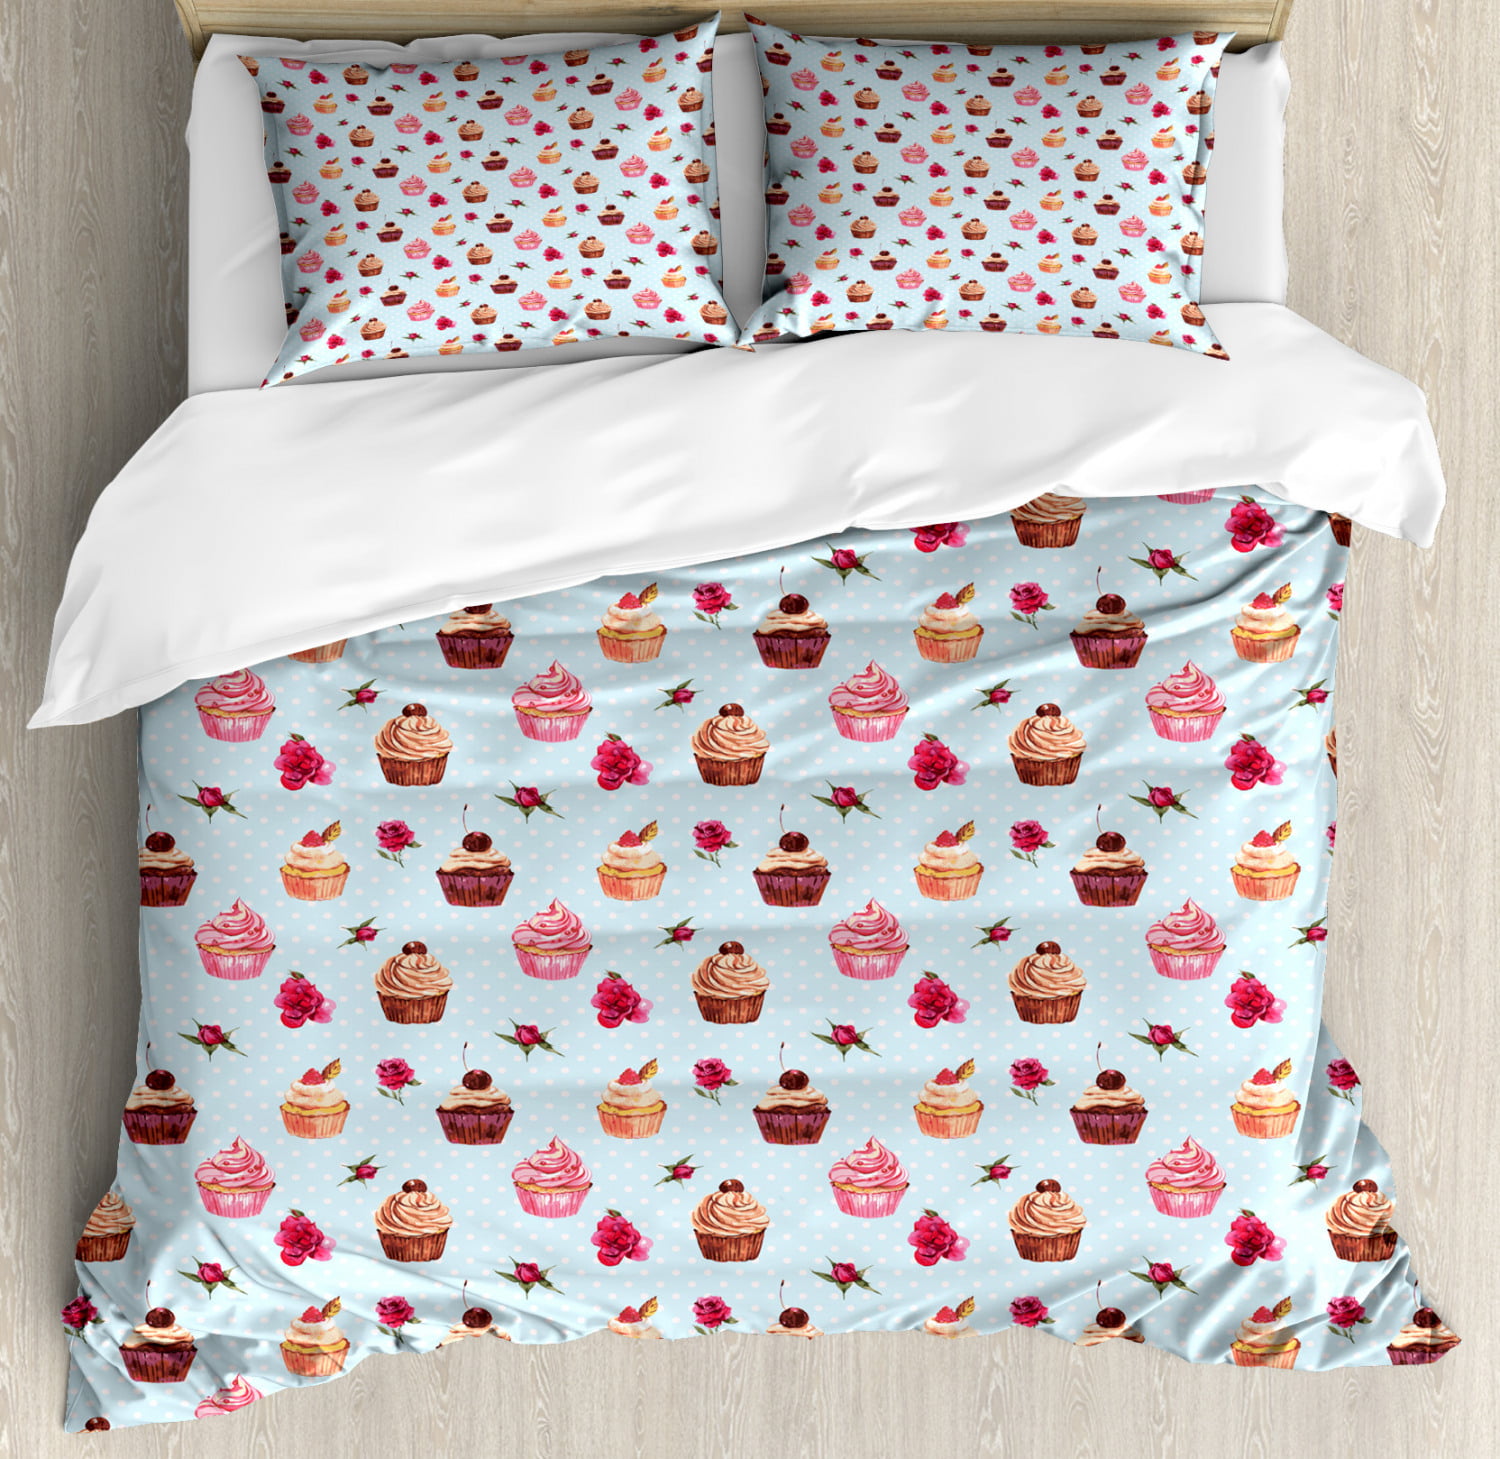 Cupcake Duvet Cover Set King Size Valentines Lovers Muffins With